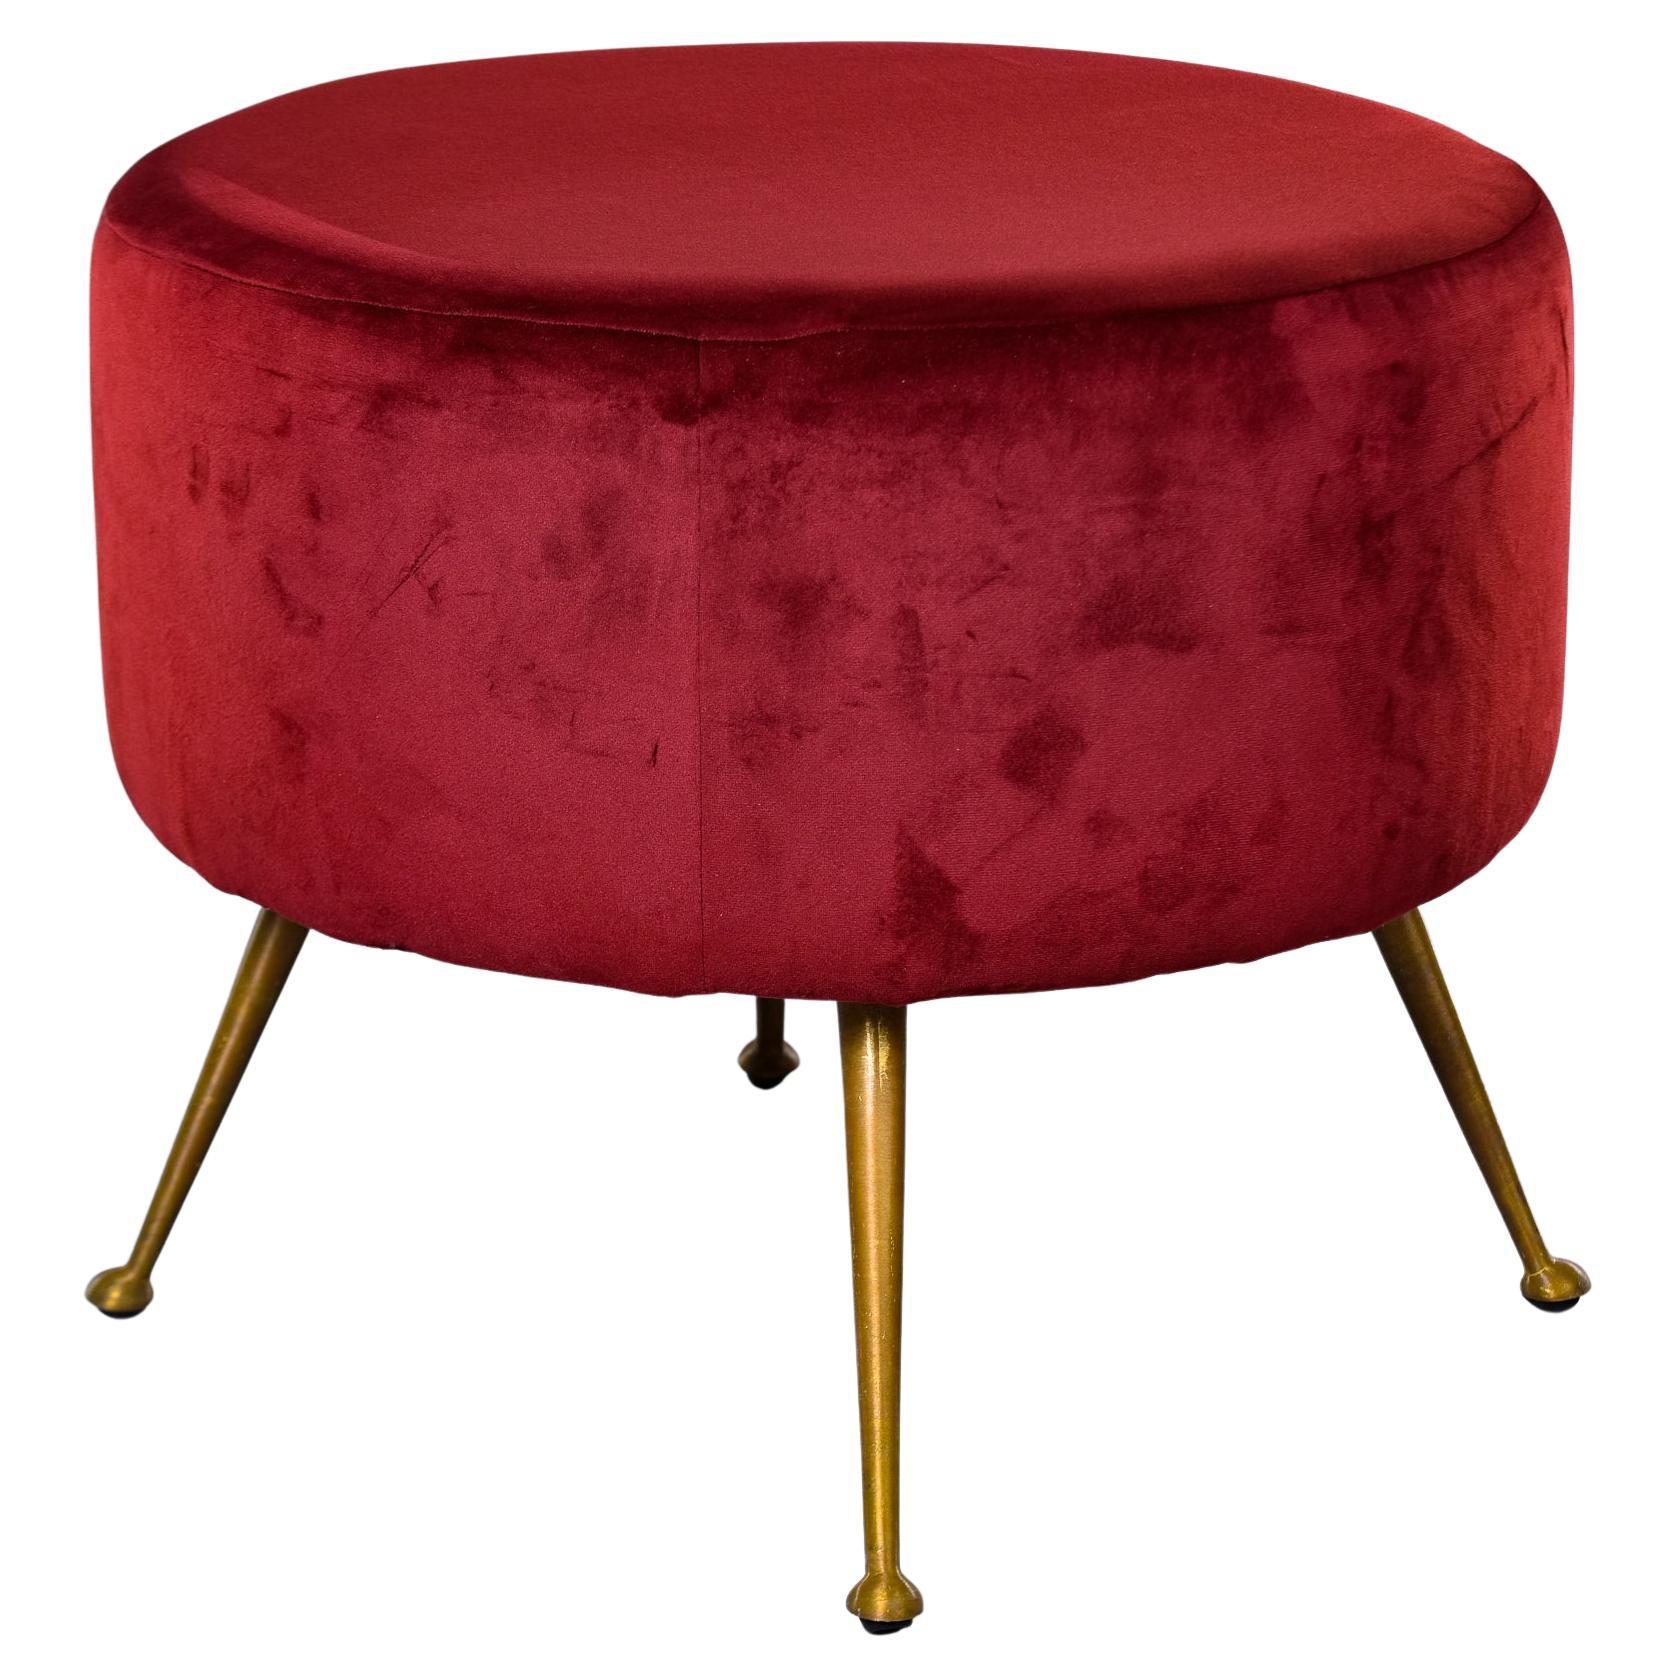 Italian Midcentury Round Stool with Red Upholstery and Brass Legs